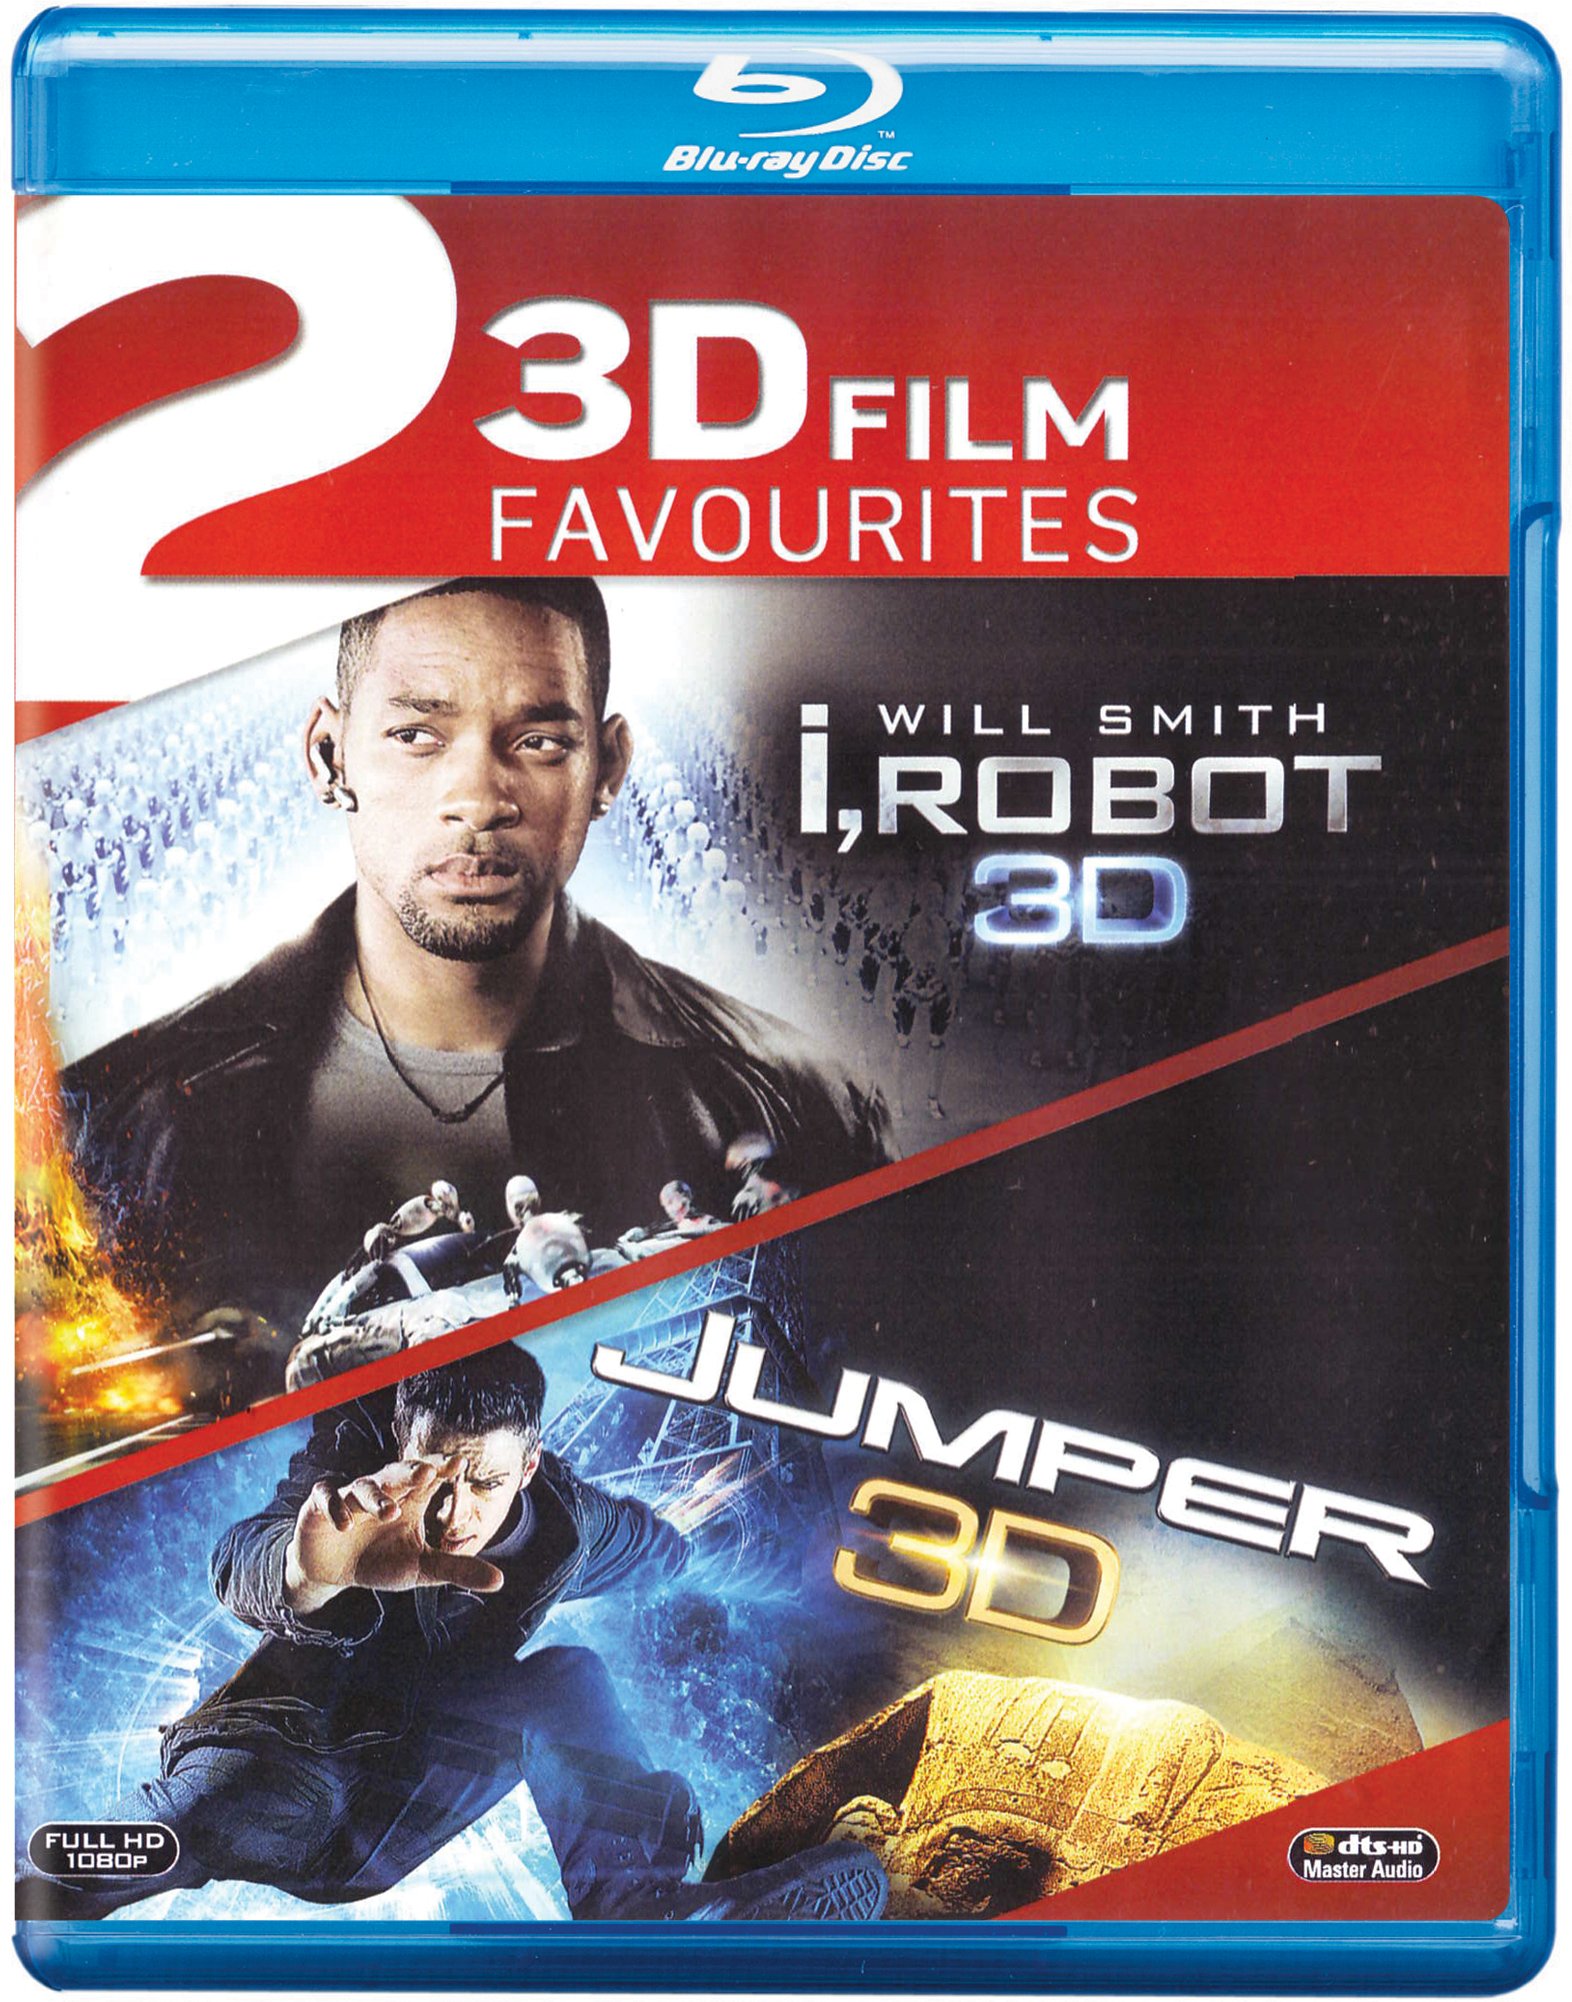 2-movies-collection-irobot-jumper-blu-ray-3d-movie-purchase-or-w